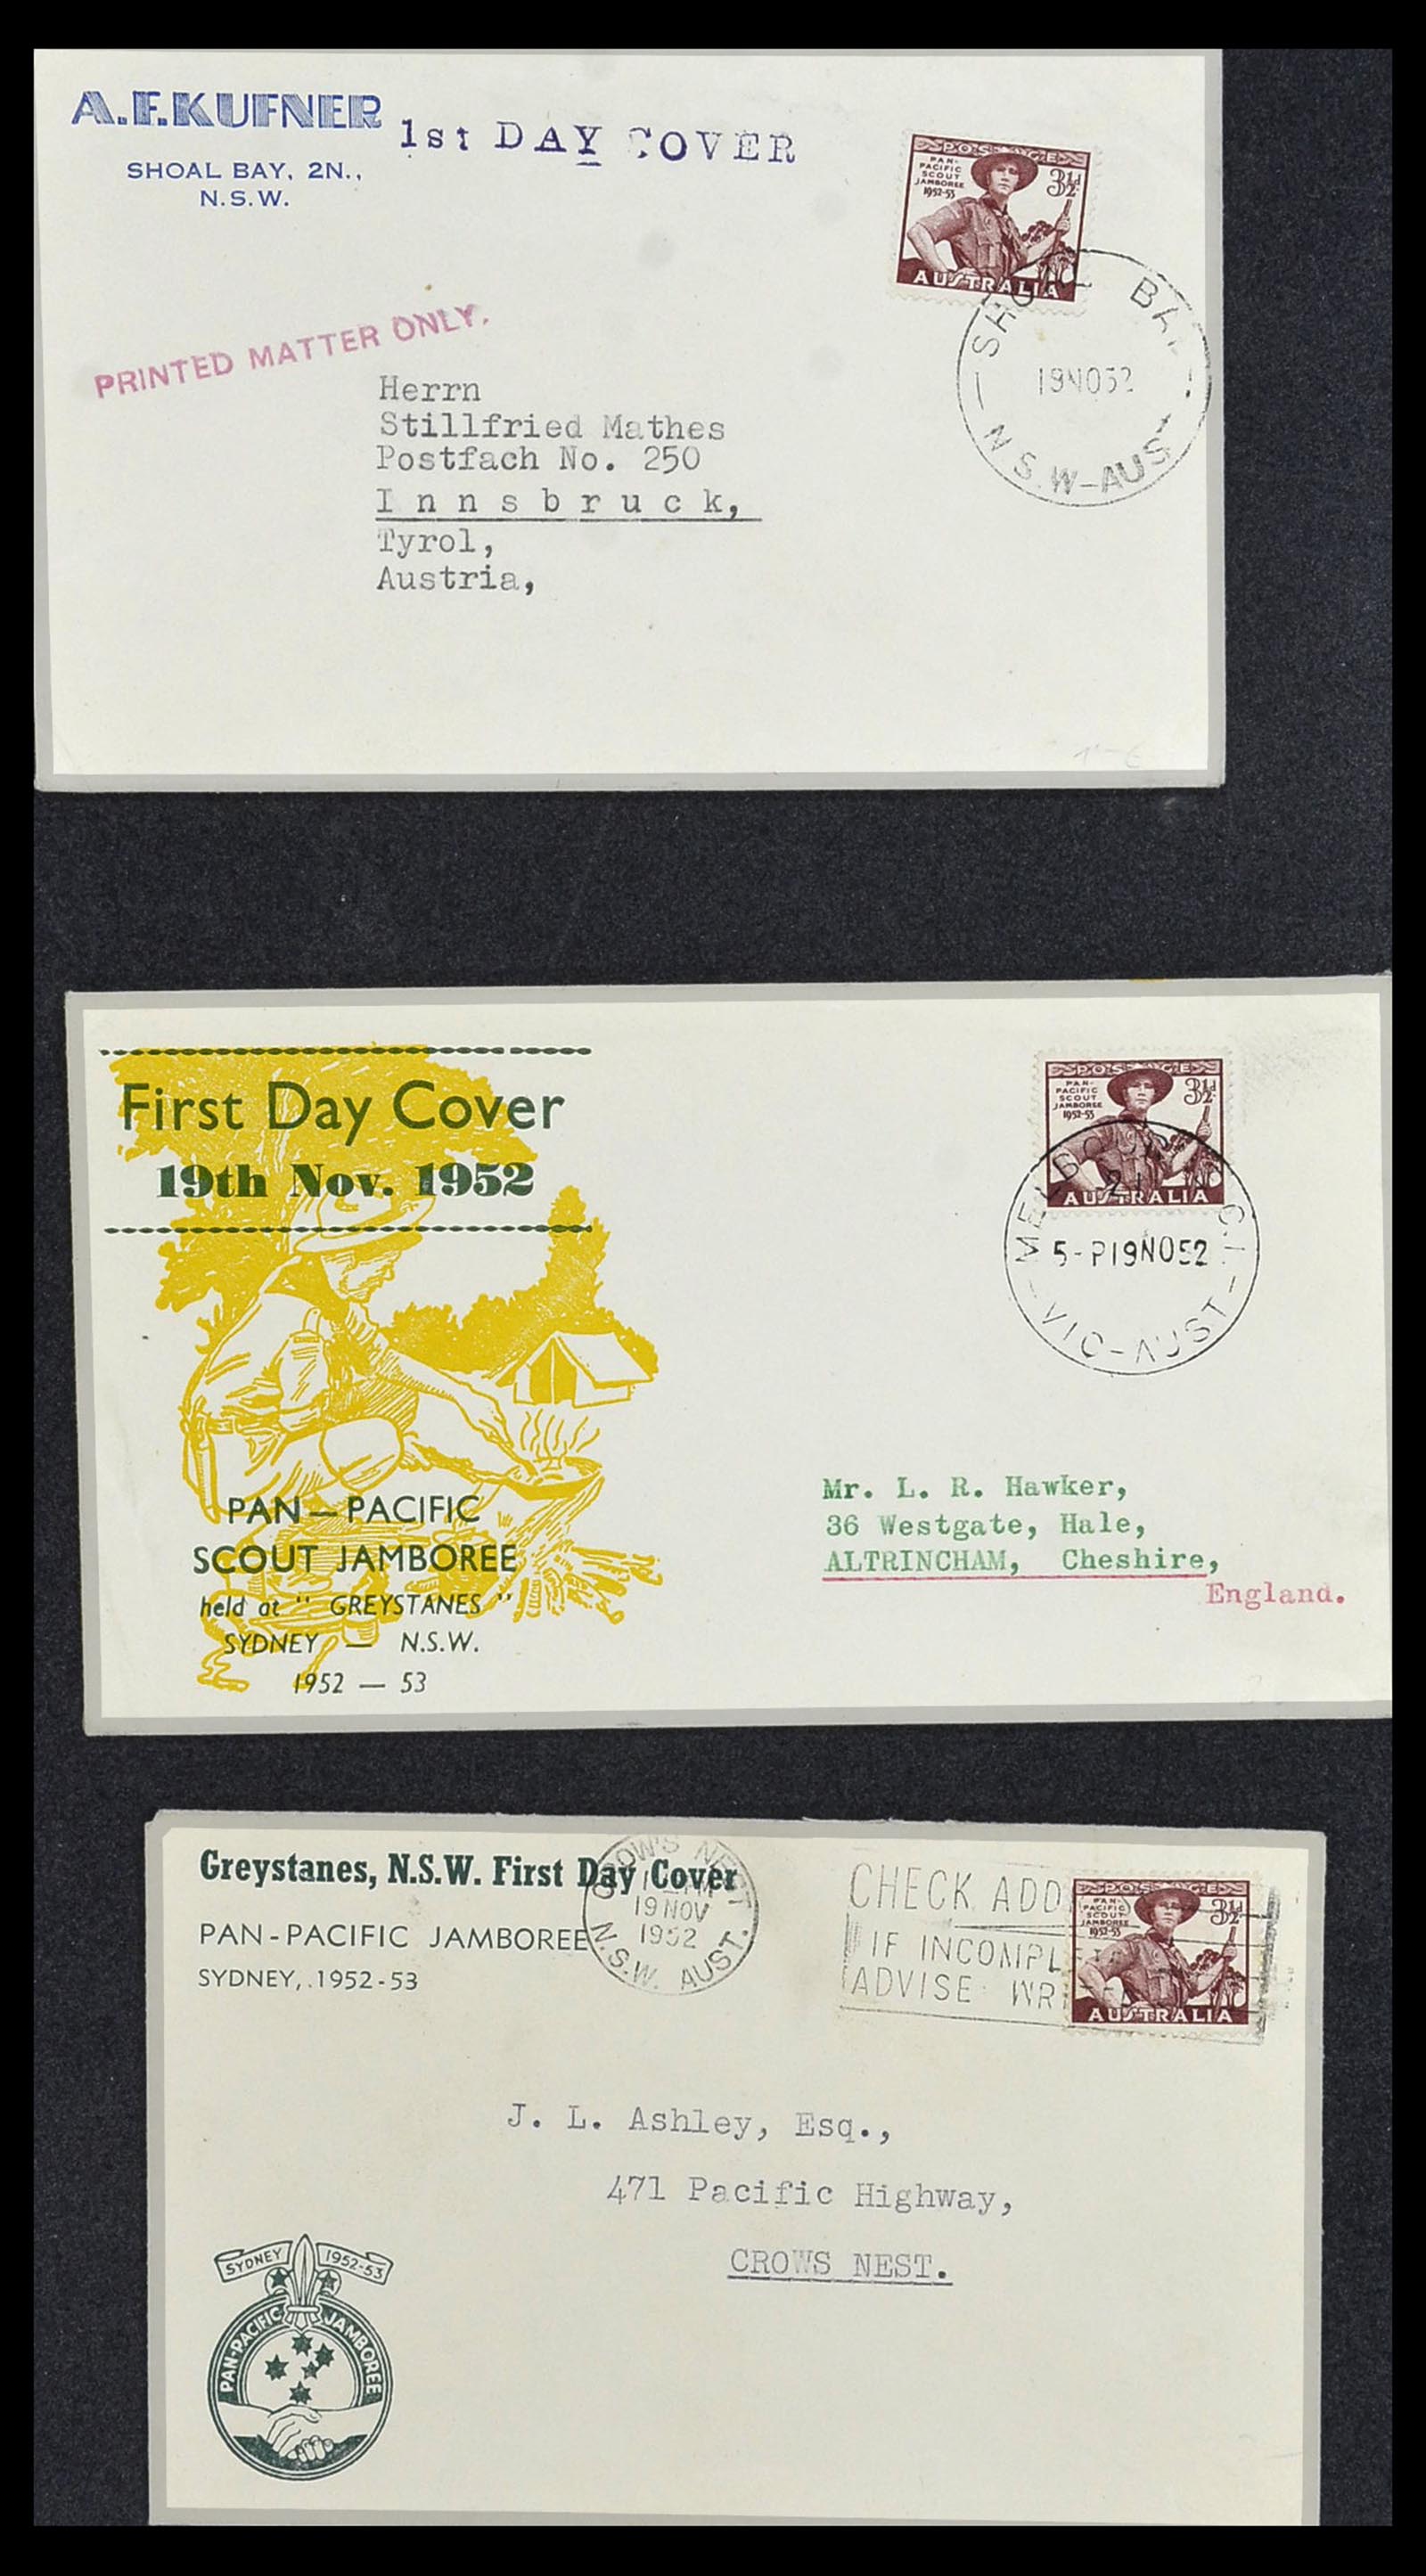 34118 072 - Stamp collection 34118 Australia FDC's 1944-1952.